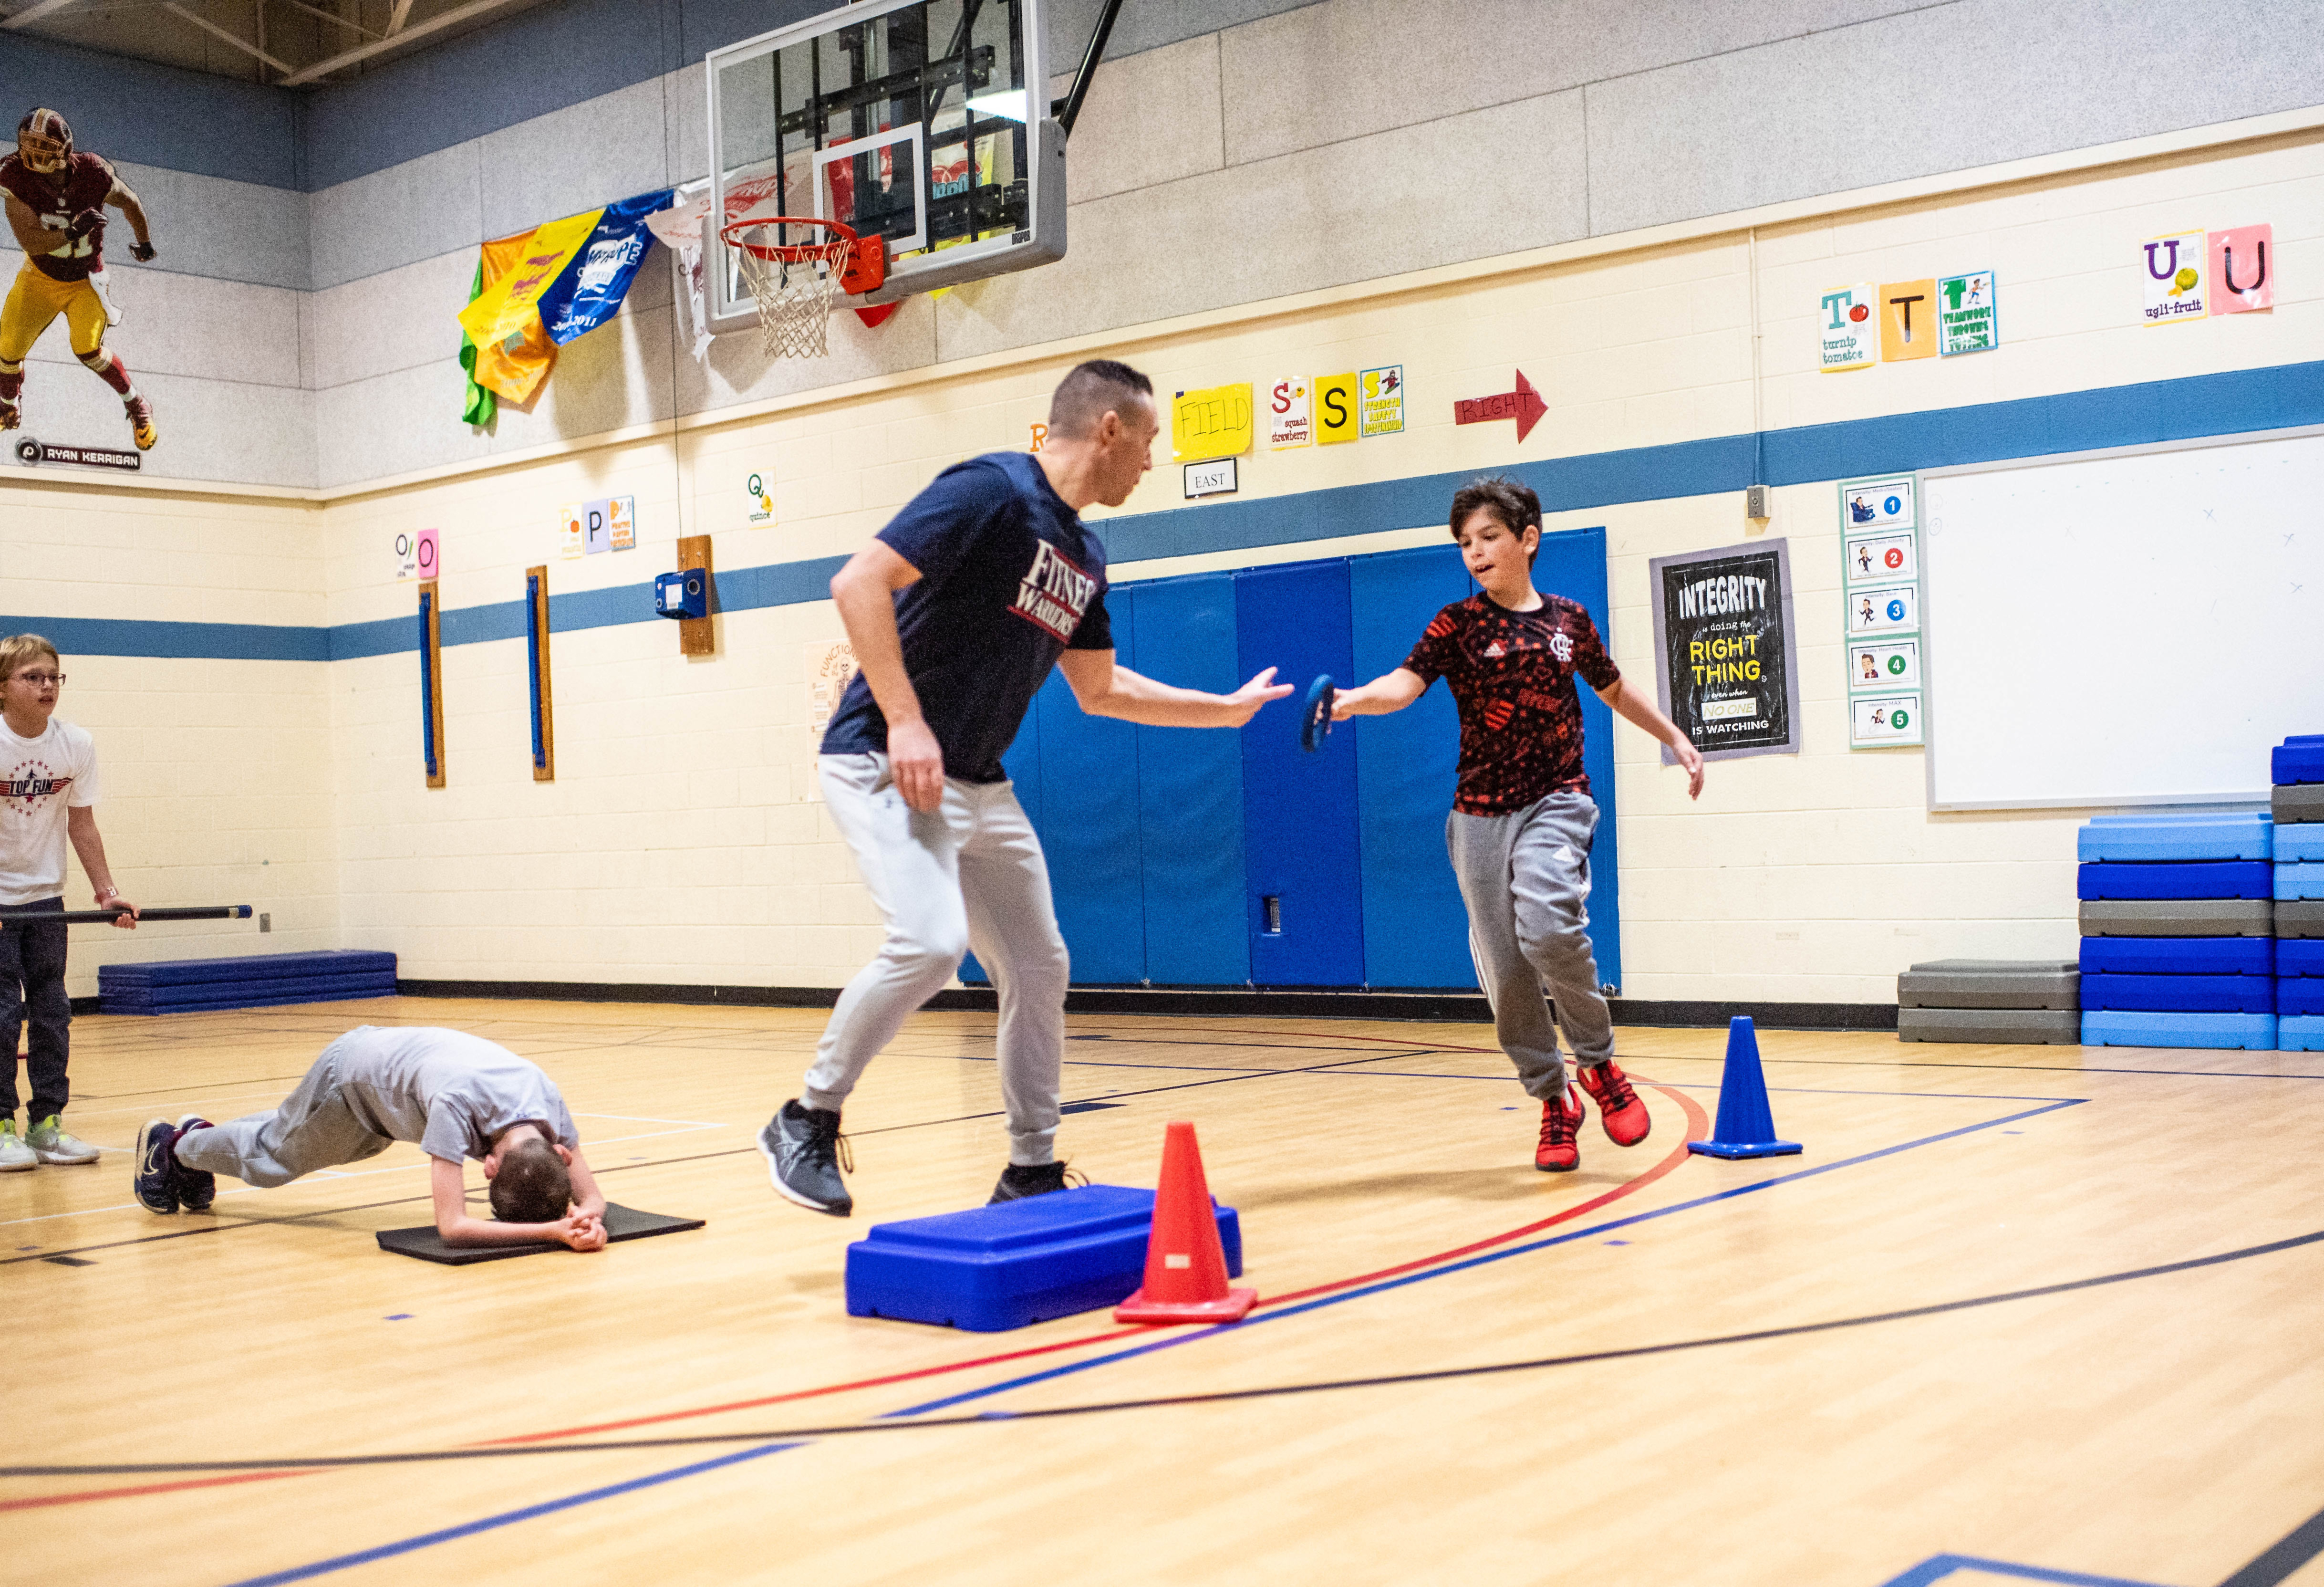 Chesterbrook's physical education teacher Jay Levesque hands off a ring to a student during a workout.